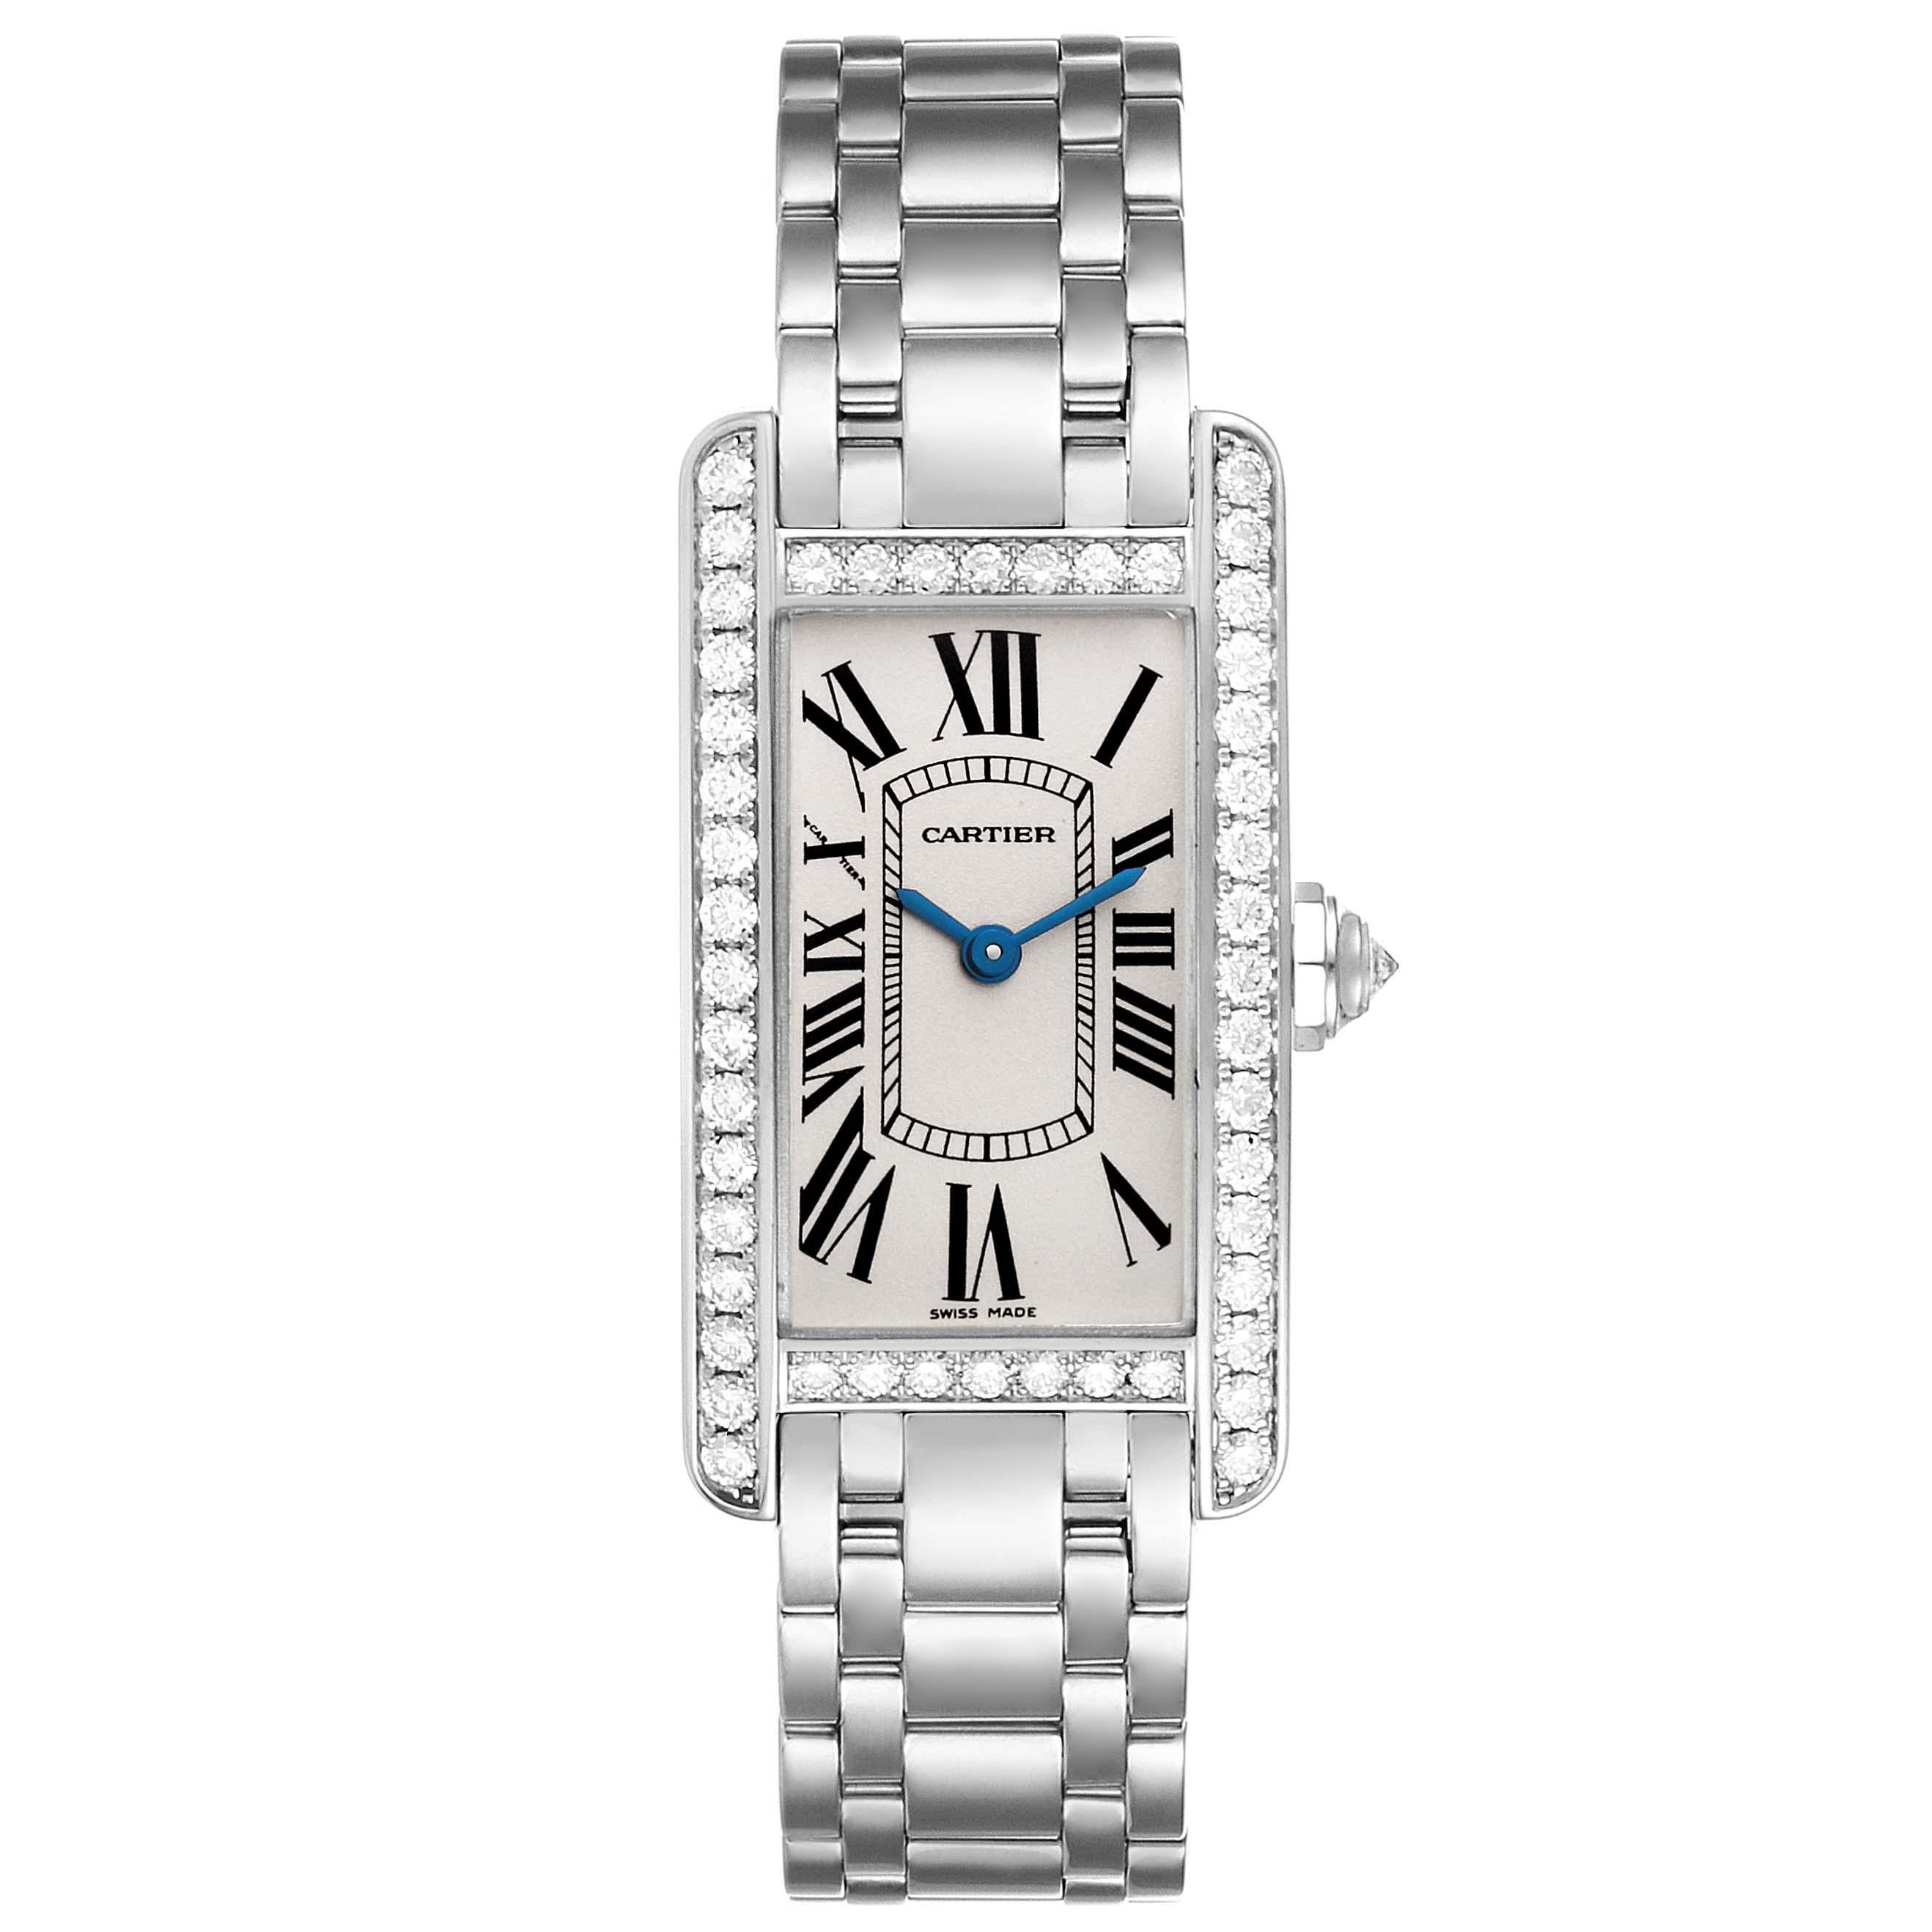 Cartier Tank Americaine White Gold Diamond Ladies Watch WB7073L1 Box Papers 1